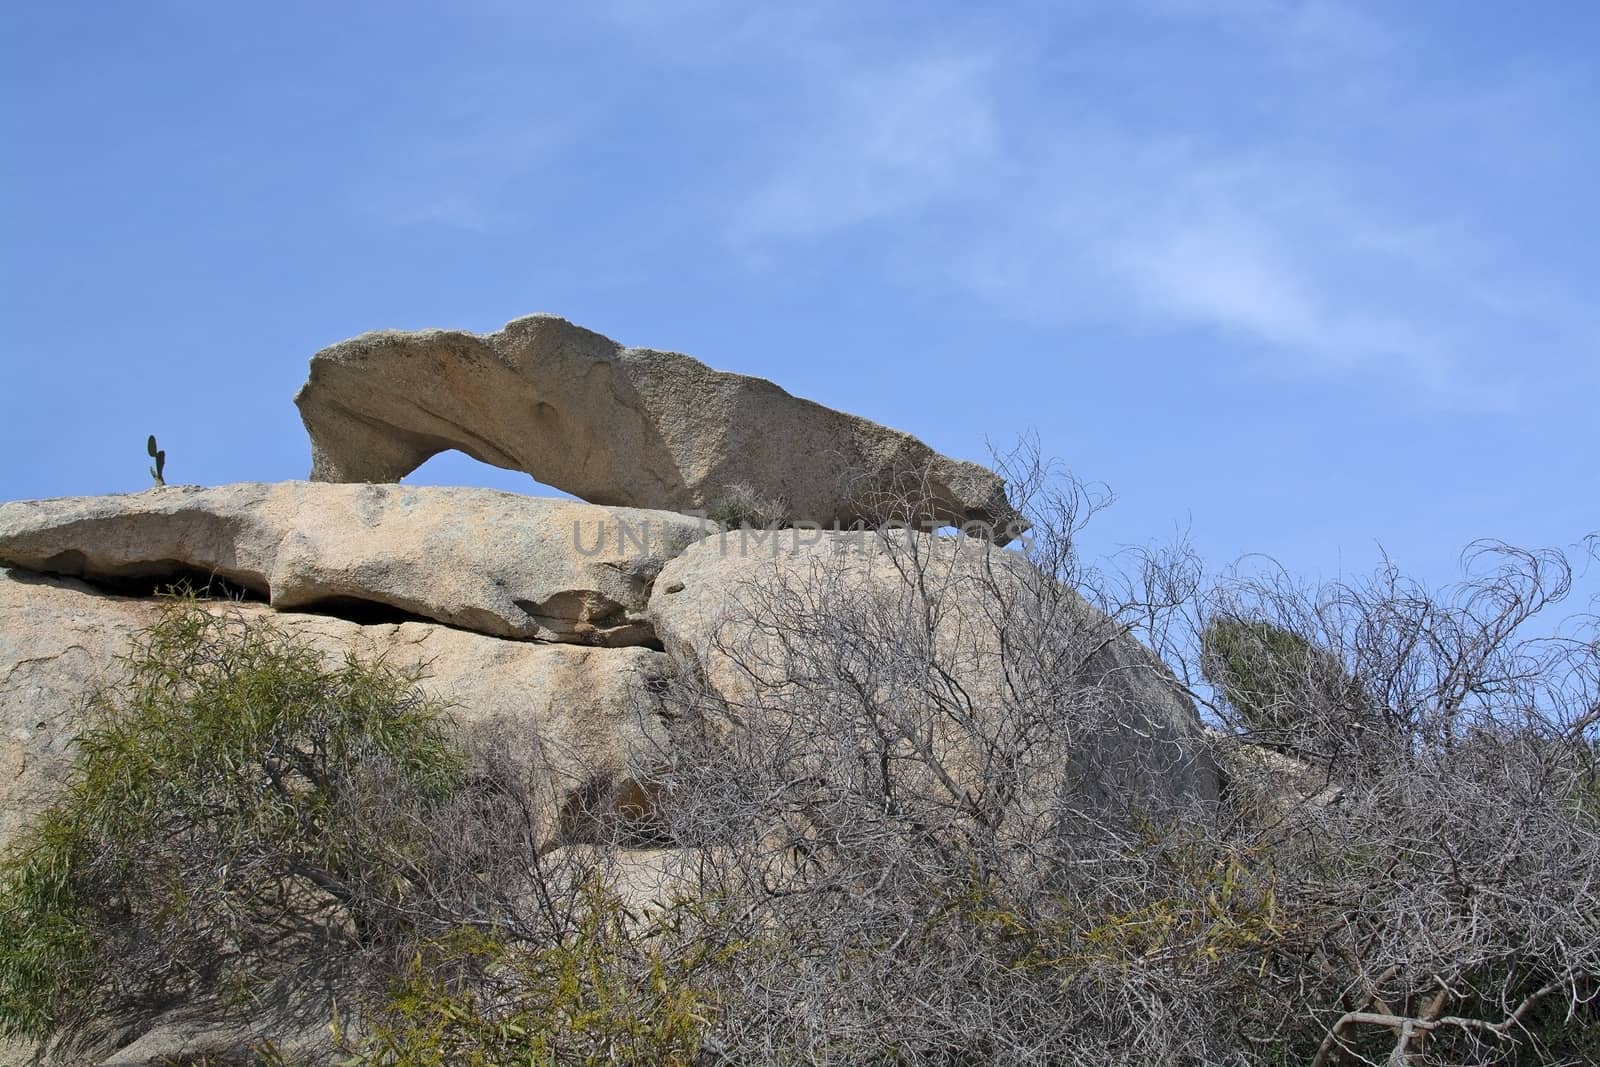 Slab of granite rock lying on top of eroded cliff by ArtesiaWells